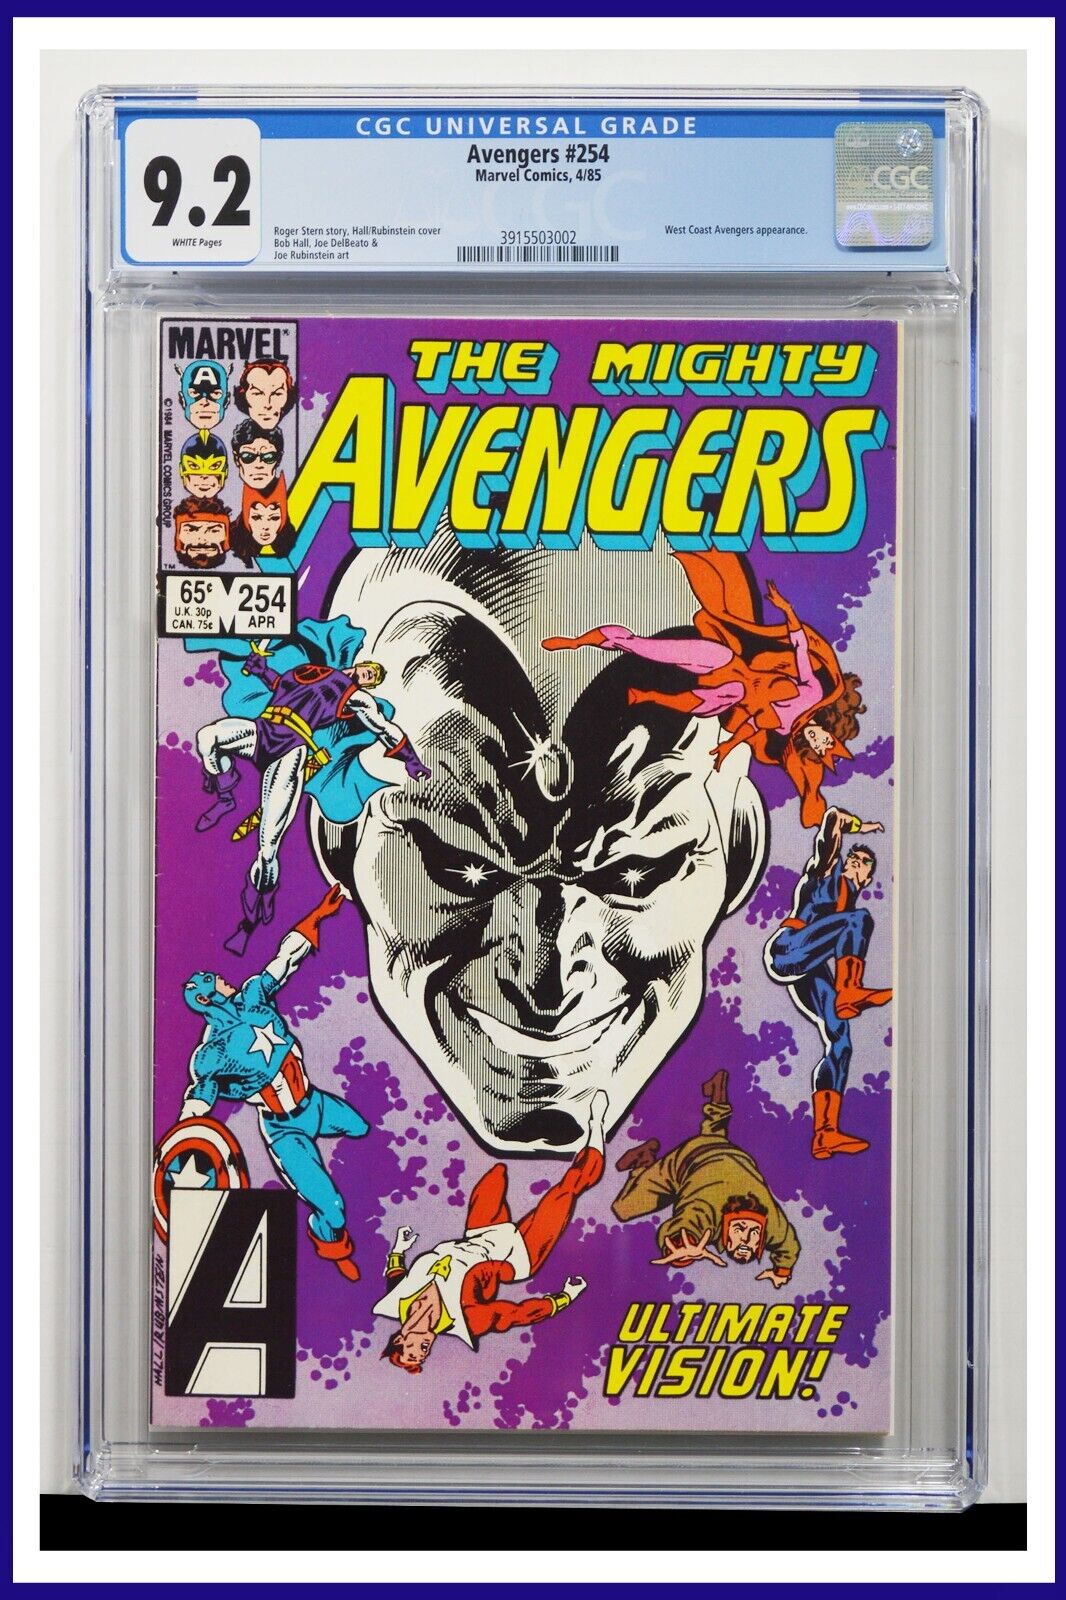 Avengers #254 CGC Graded 9.2 Marvel April 1985 White Pages Comic Book.